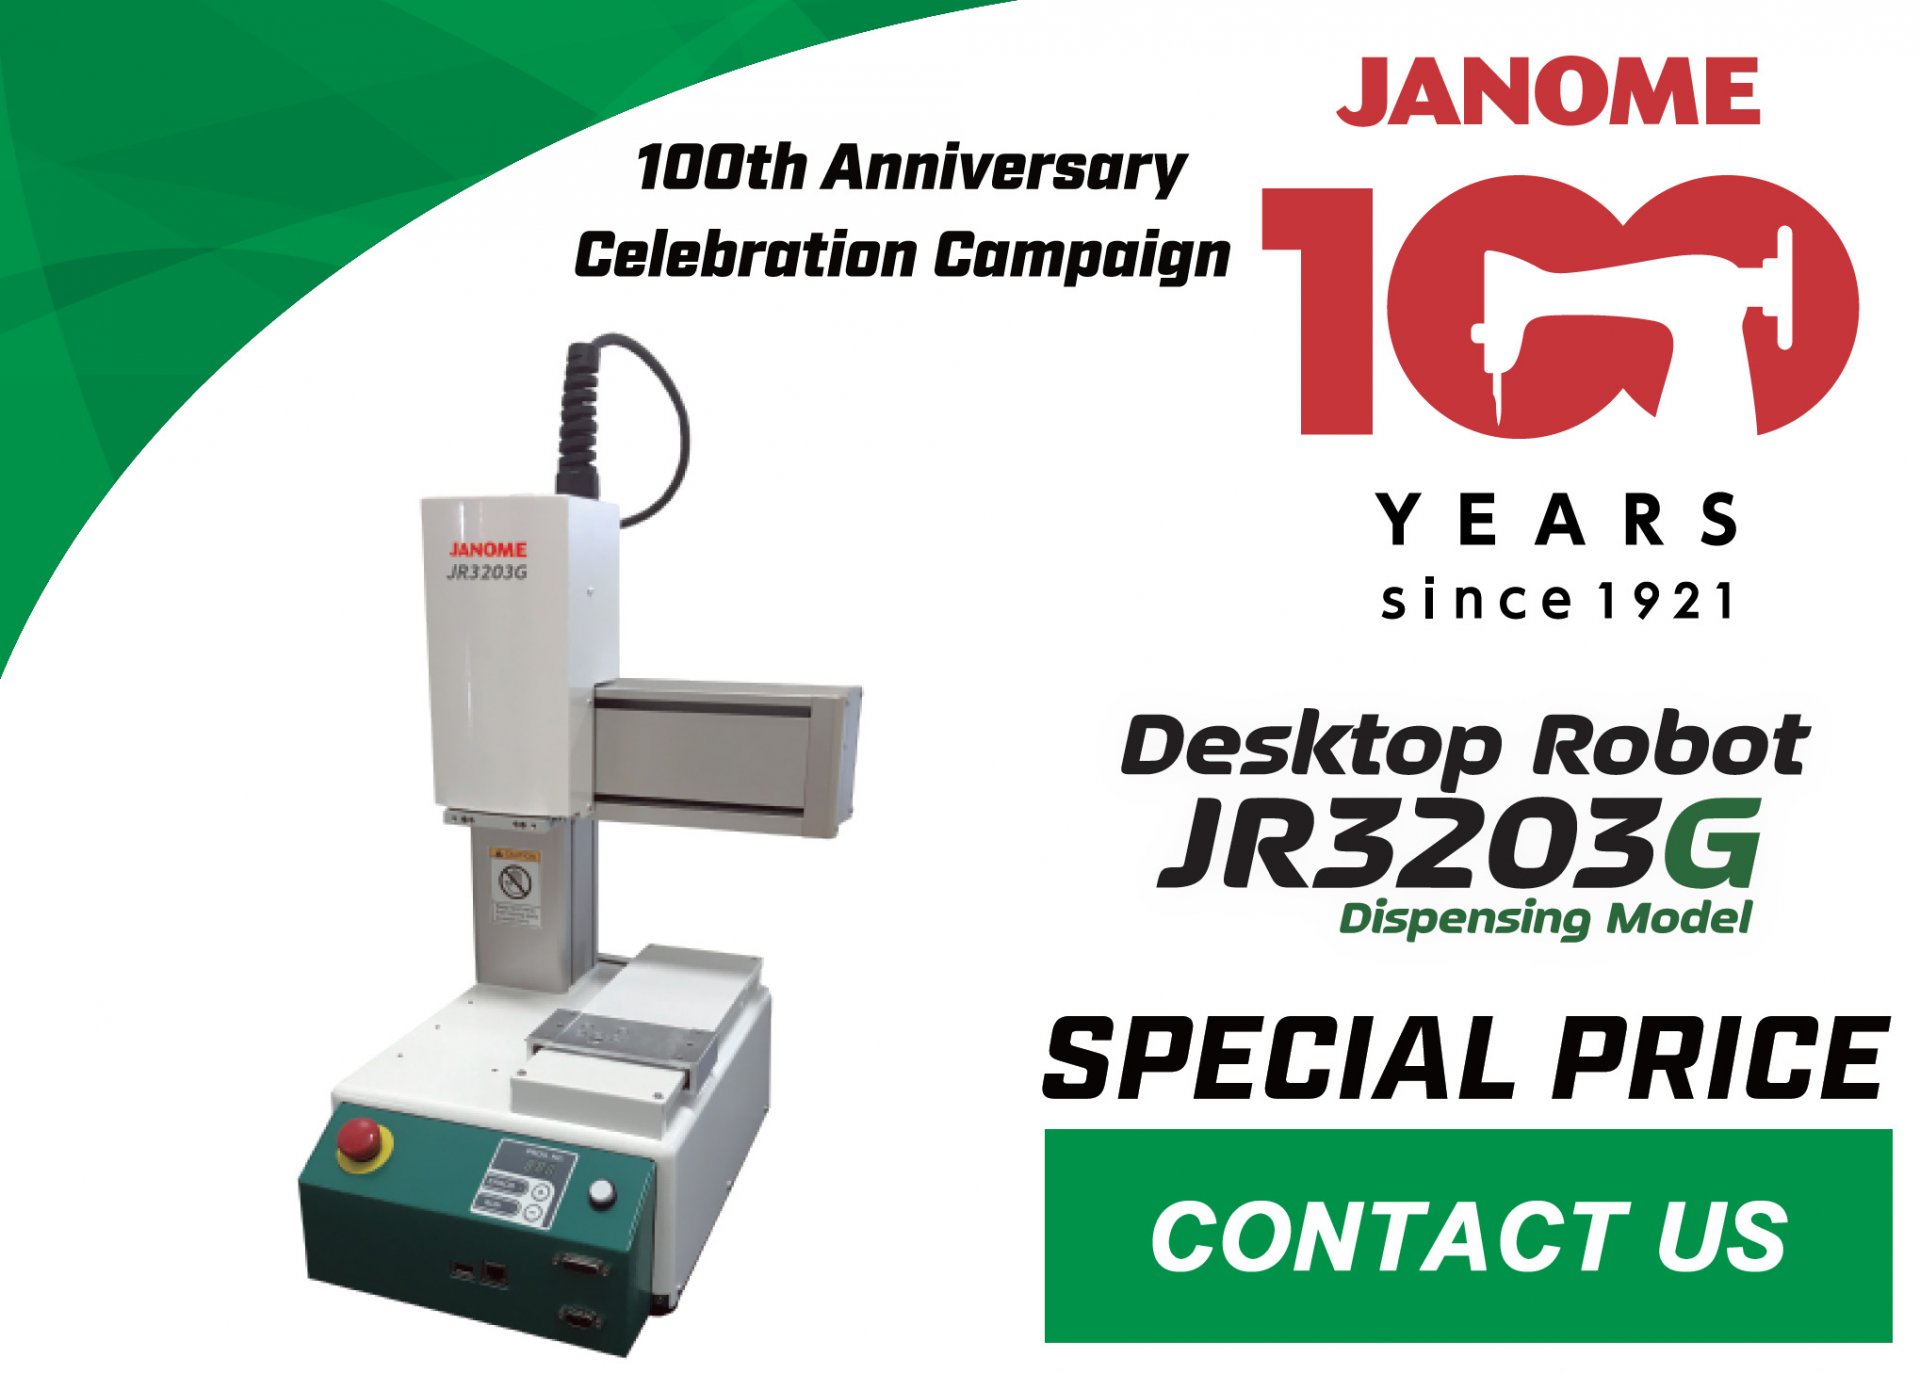 Promotion | JANOME 100th Anniversary